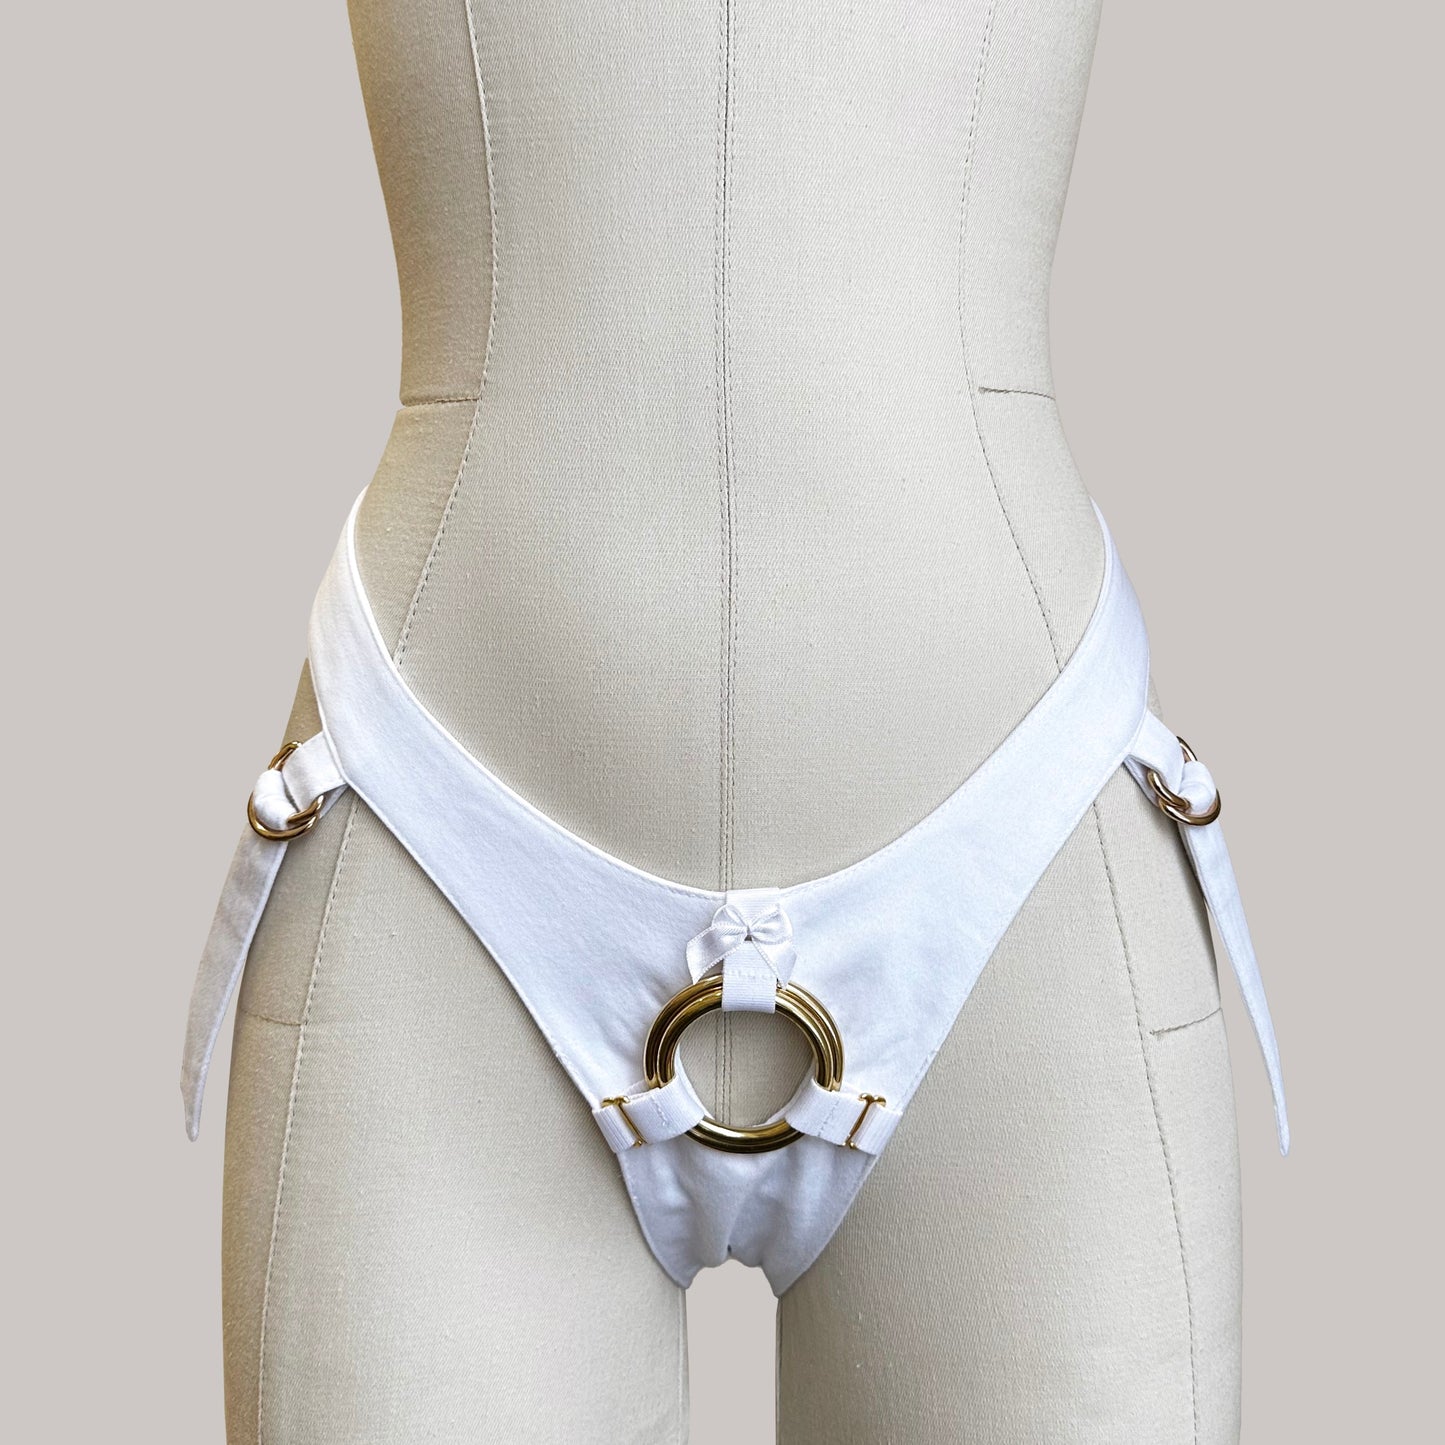 Basic High Waisted Strap-On Harness with Ring